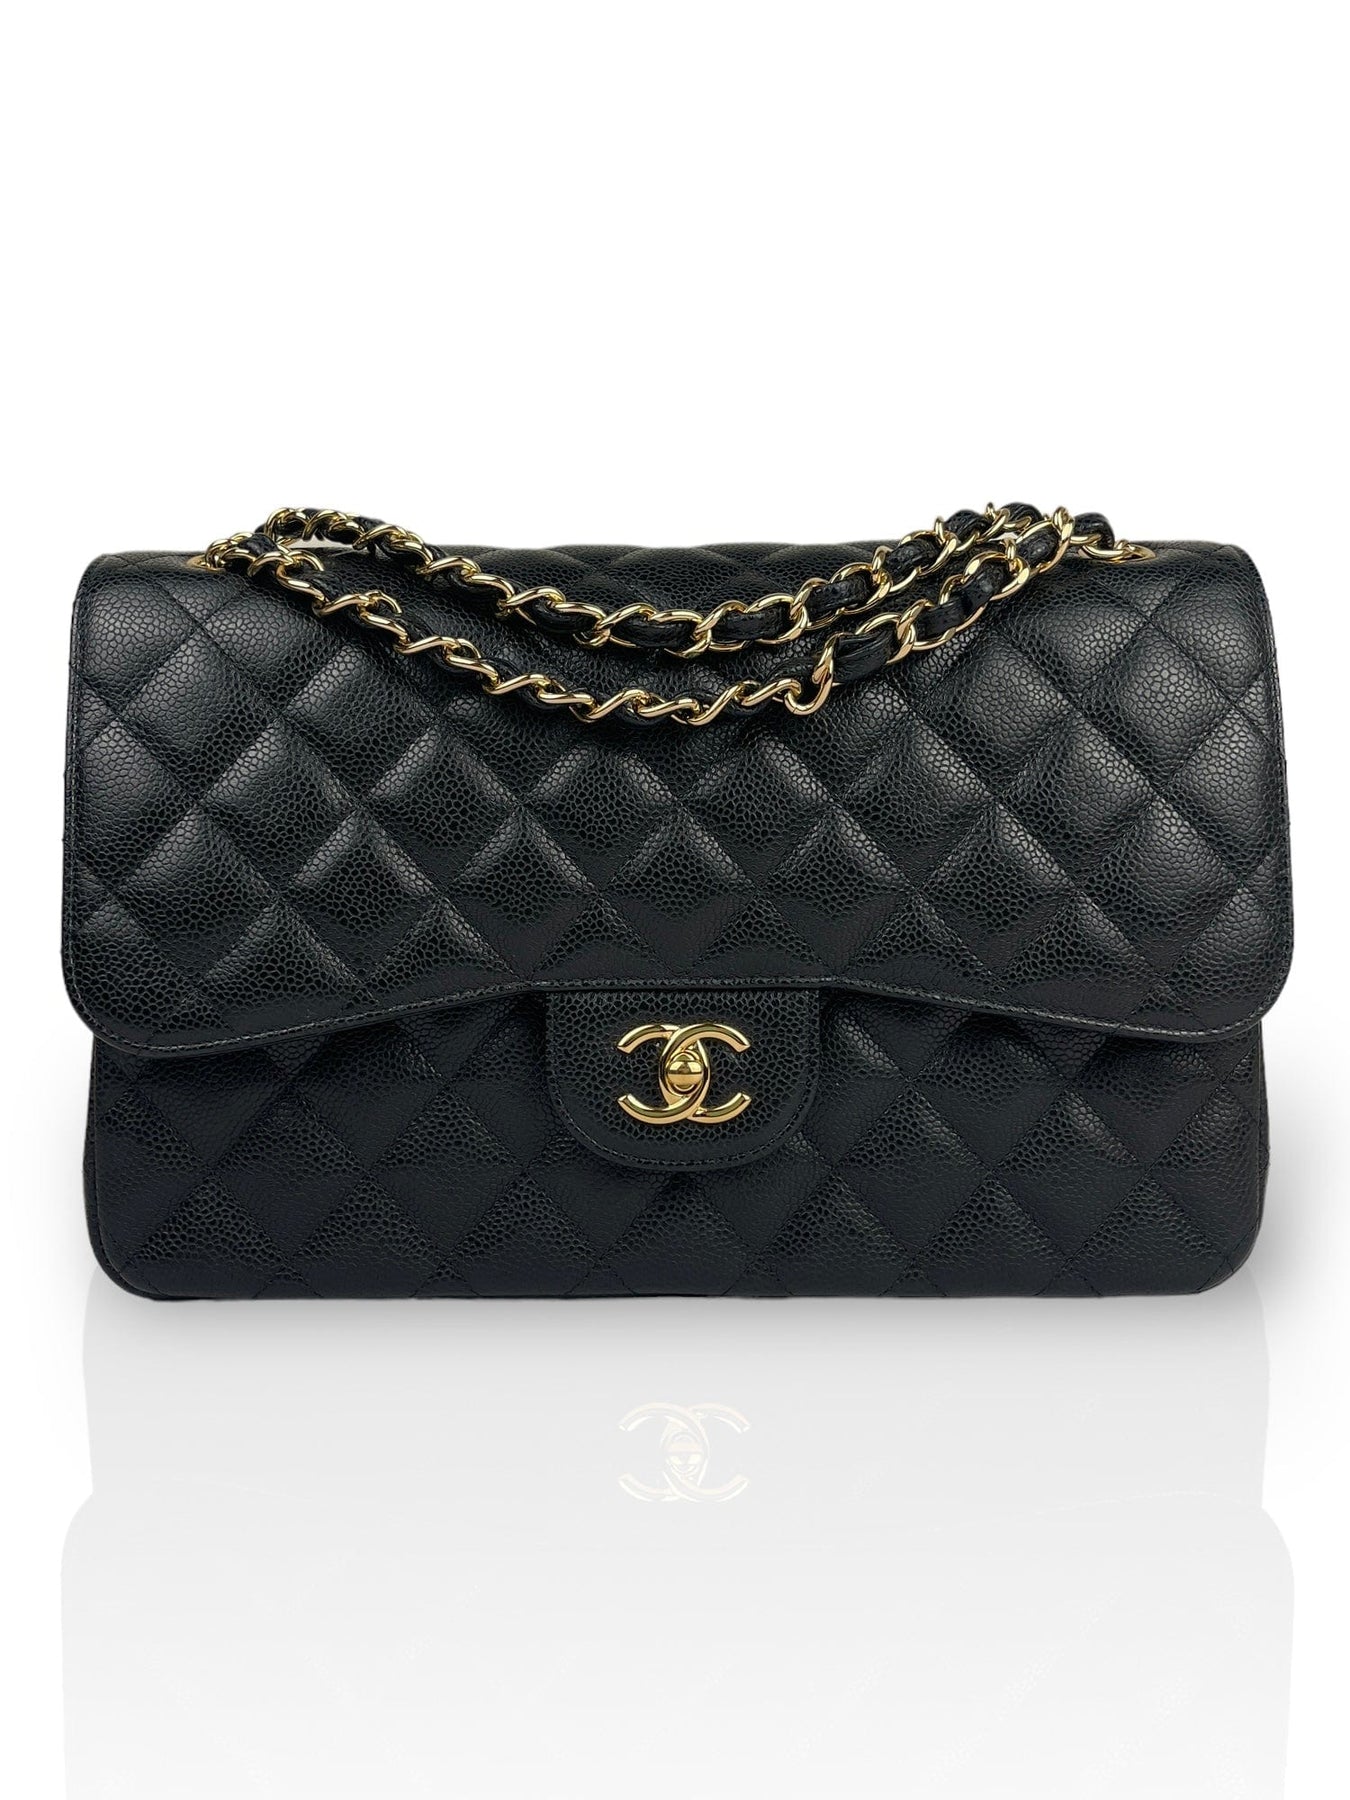 Get the best deals on CHANEL Classic Flap Gold Bags & Handbags for